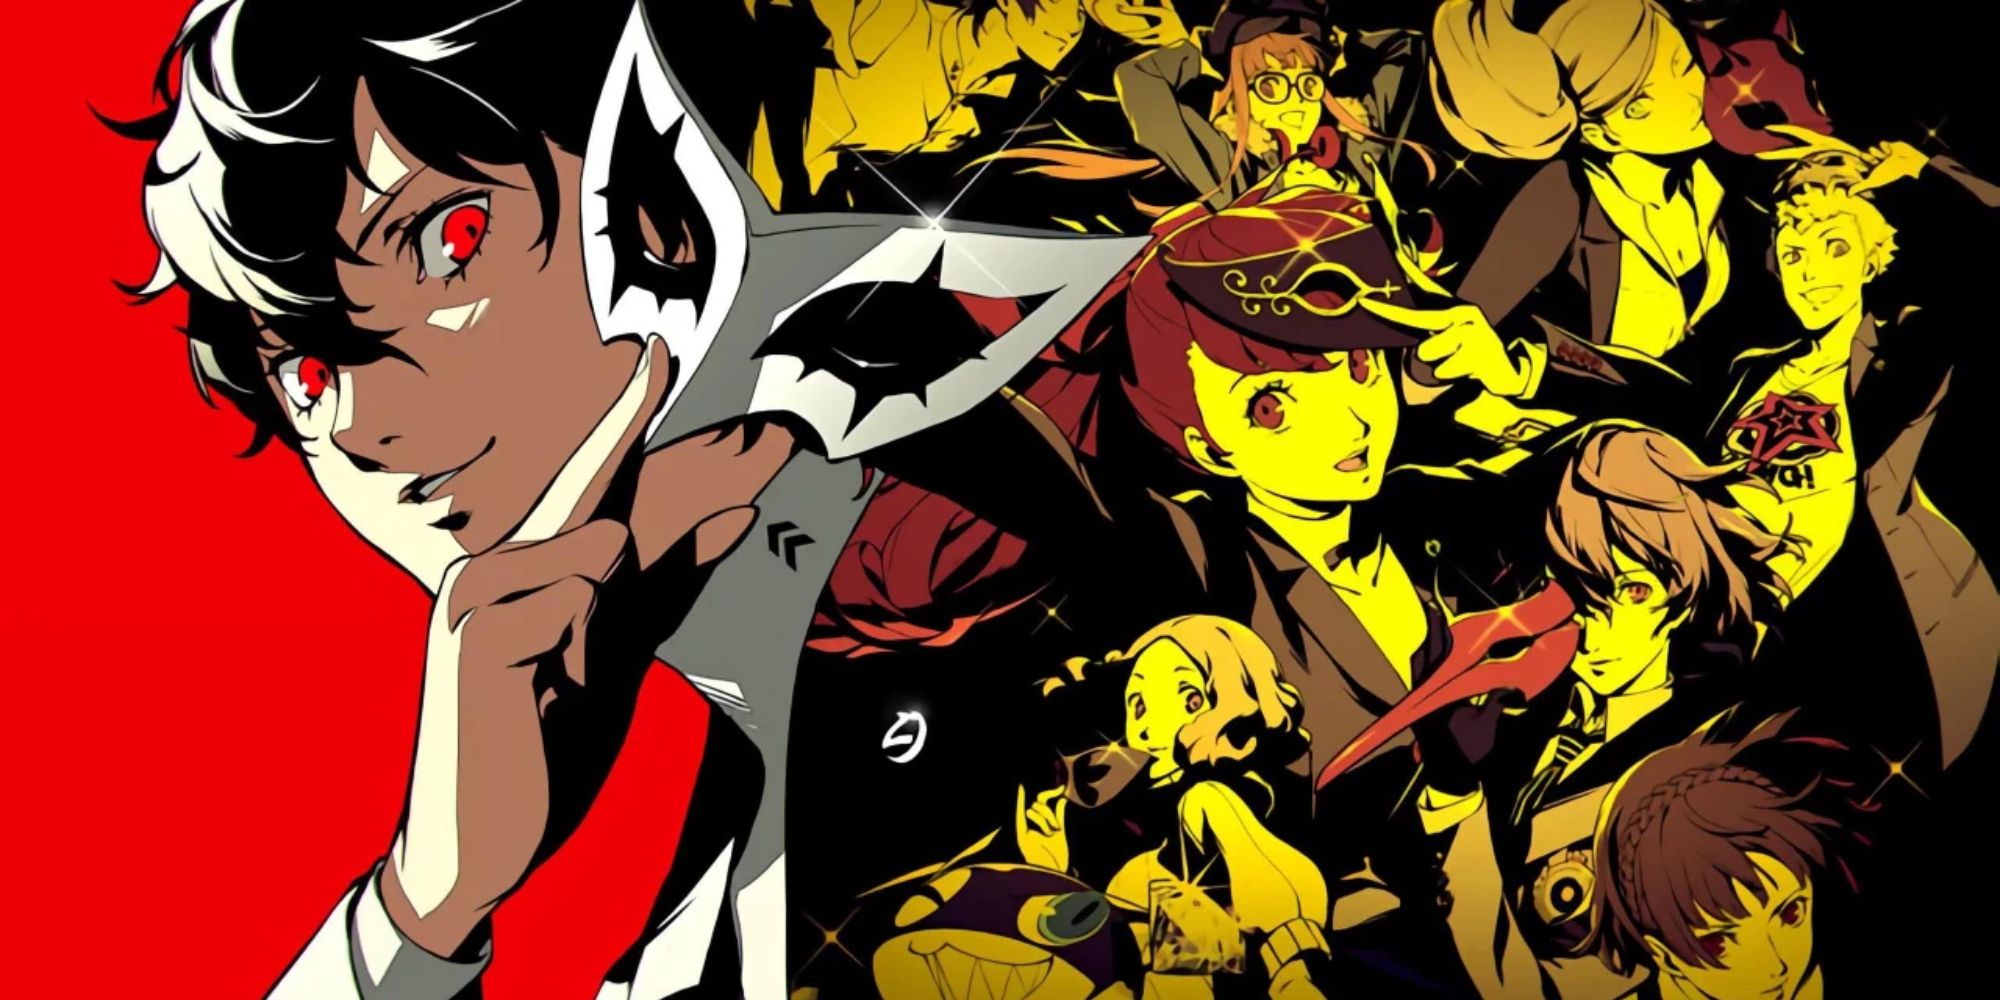 JRPG Battle Themes cover art for the game Persona 5 Royale with the protagonist Joker holding his mask on the left with the game's remaining protagonists on the right